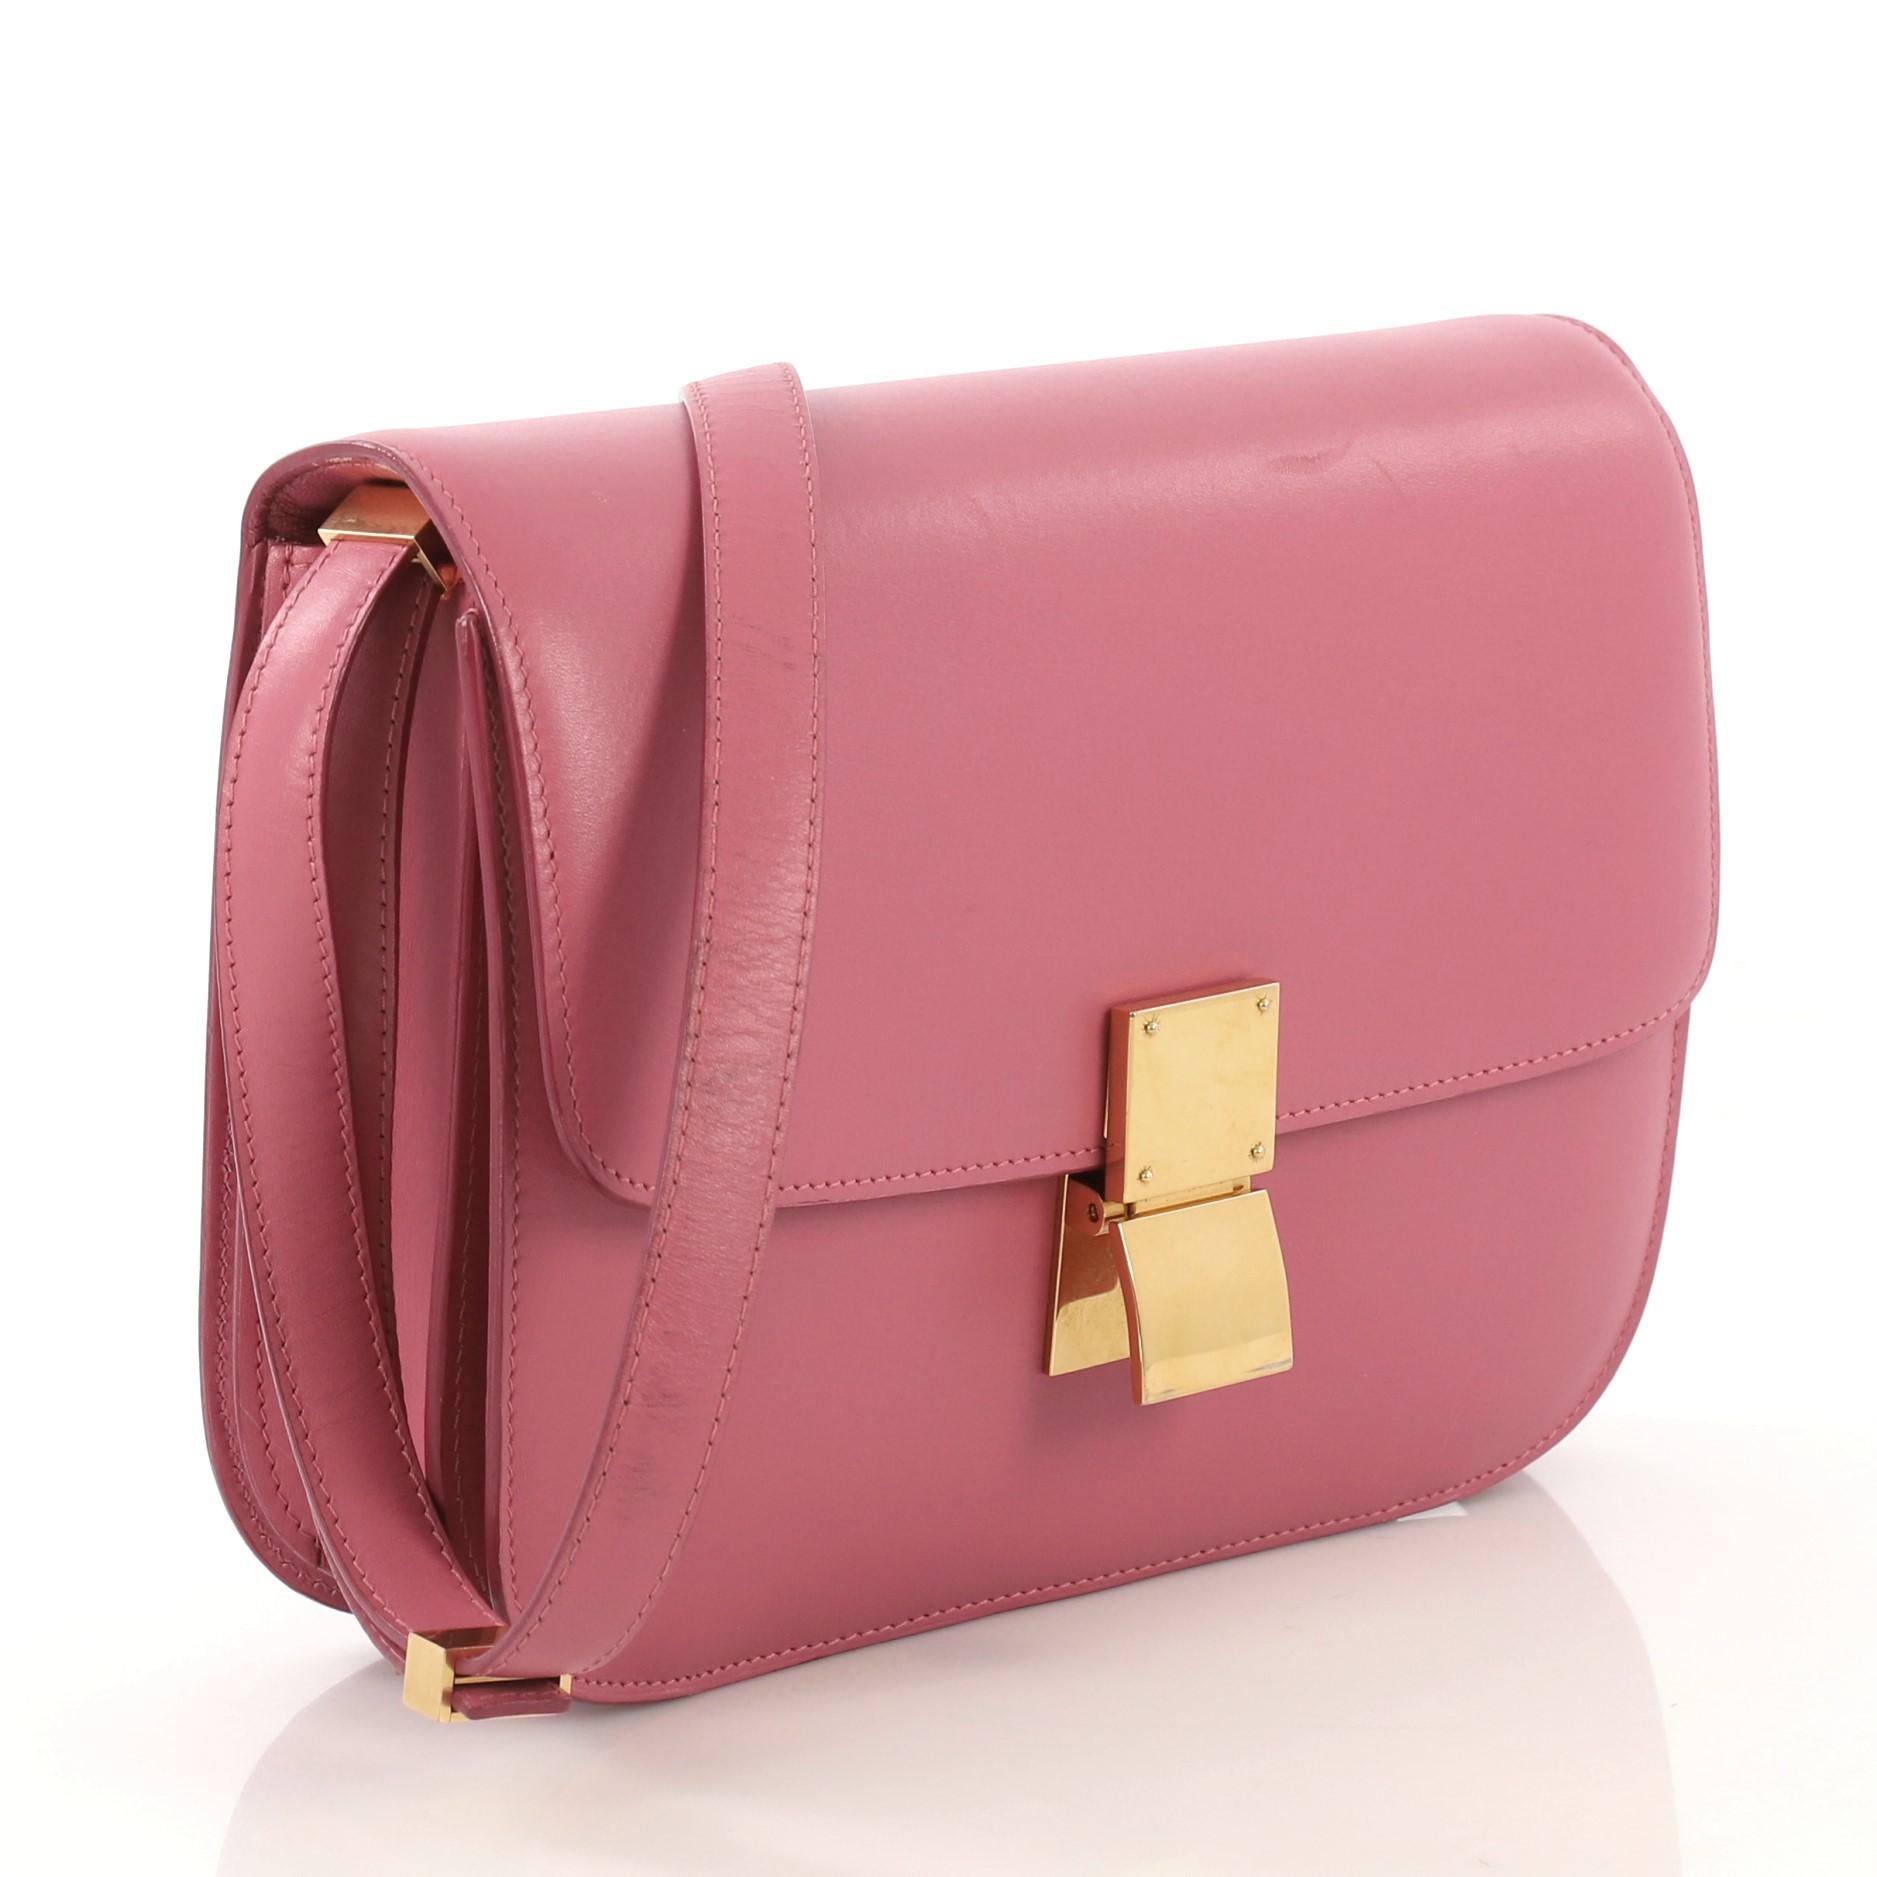 This Celine Classic Box Bag Smooth Leather Medium, crafted from pink smooth leather, features a long adjustable strap and gold-tone hardware. Its push-tab closure opens to a pink leather interior with two open compartments, zip compartment and slip